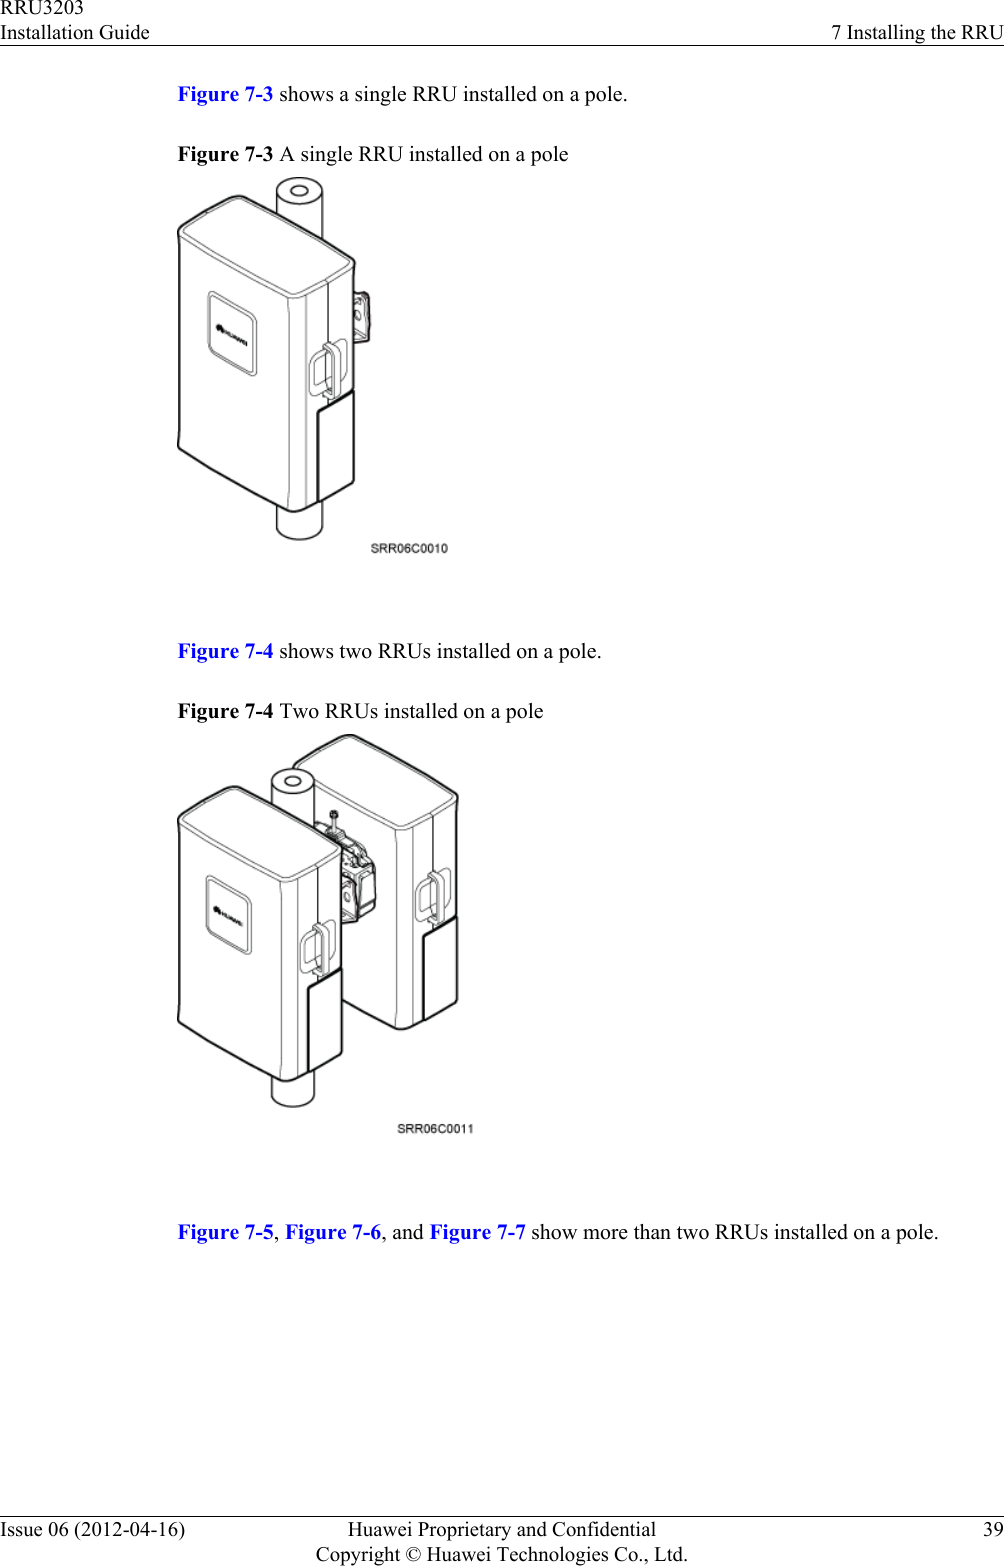 Figure 7-3 shows a single RRU installed on a pole.Figure 7-3 A single RRU installed on a pole Figure 7-4 shows two RRUs installed on a pole.Figure 7-4 Two RRUs installed on a pole Figure 7-5, Figure 7-6, and Figure 7-7 show more than two RRUs installed on a pole.RRU3203Installation Guide 7 Installing the RRUIssue 06 (2012-04-16) Huawei Proprietary and ConfidentialCopyright © Huawei Technologies Co., Ltd.39